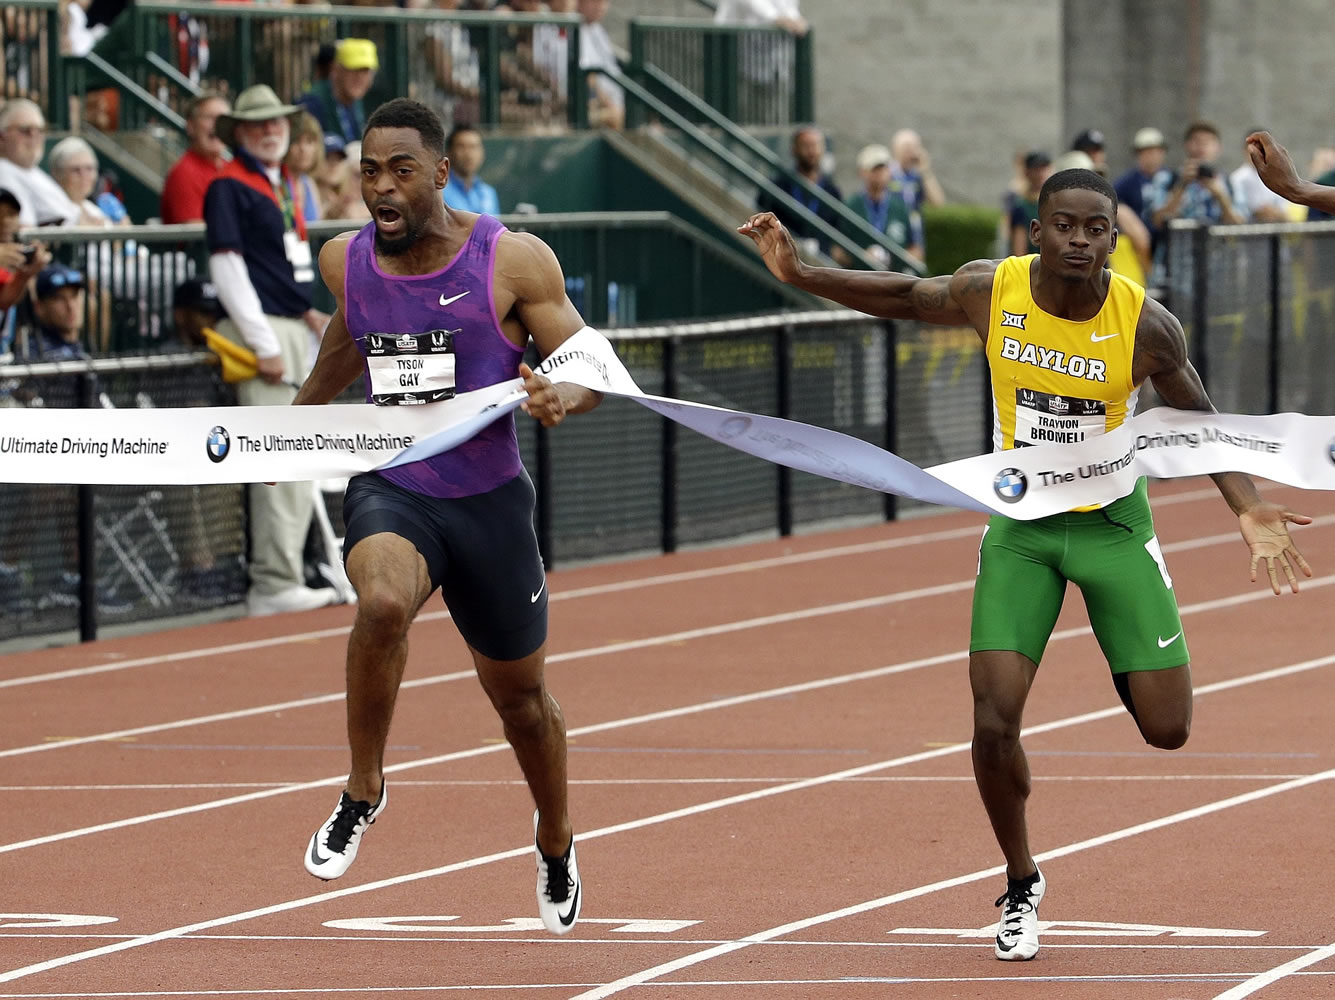 Tyson Gay, left, hits the tape ahead of Trayvon Bromell to win the 100-meter final at the U.S. Track and Field Championships in Eugene, Ore., Friday, June 26, 2015.